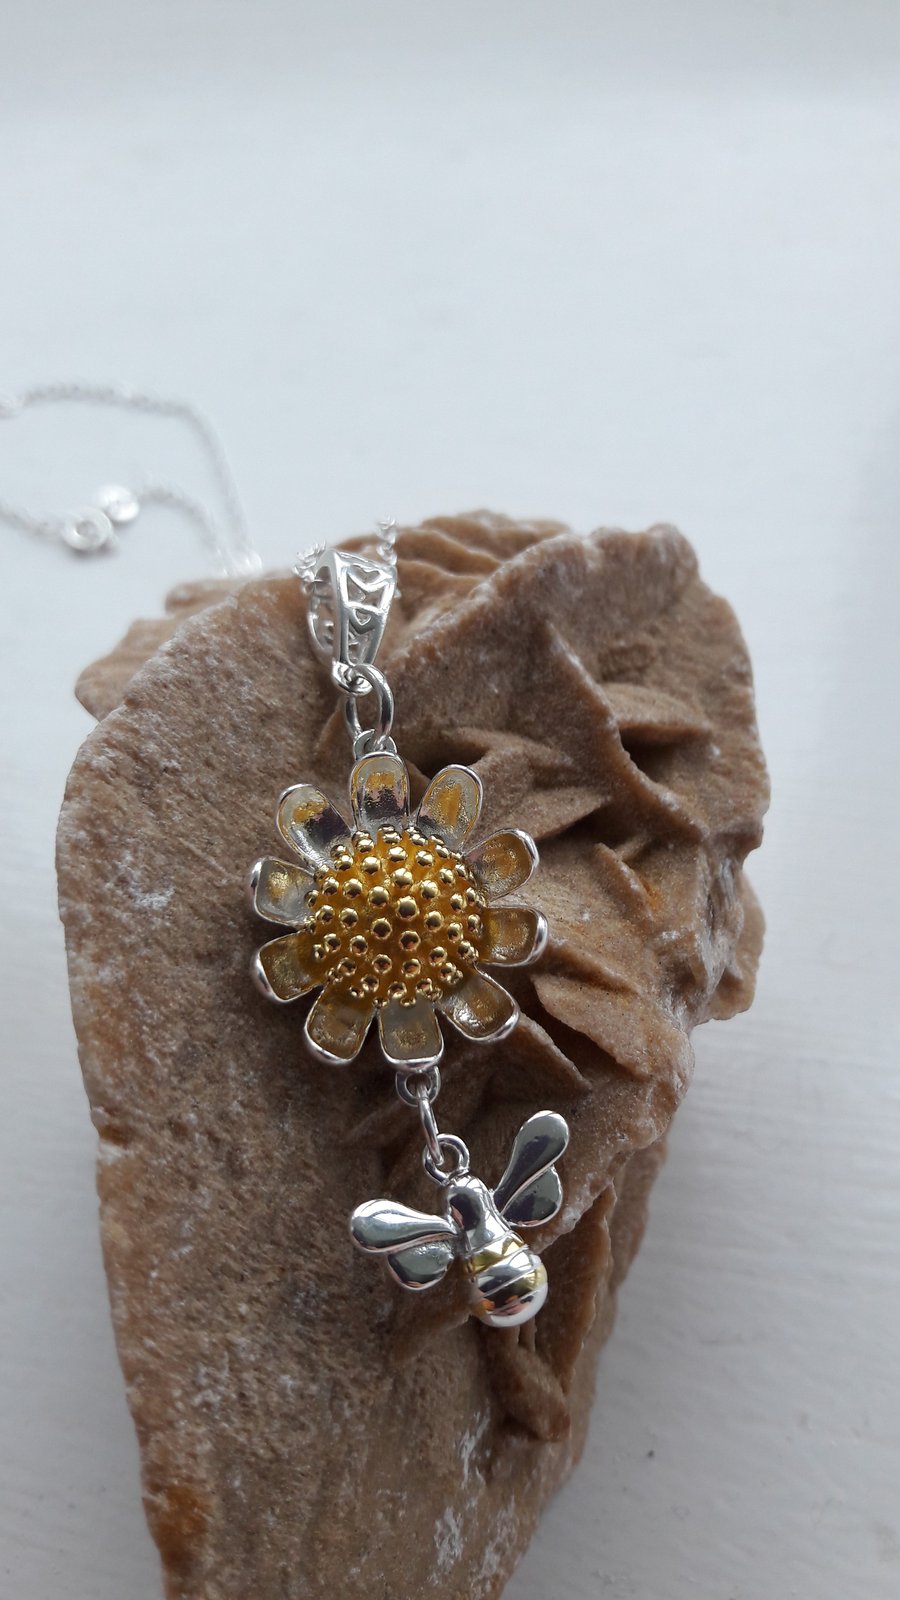 Sterling Silver Daisy and Bee Pendant on Sterling Silver Chain